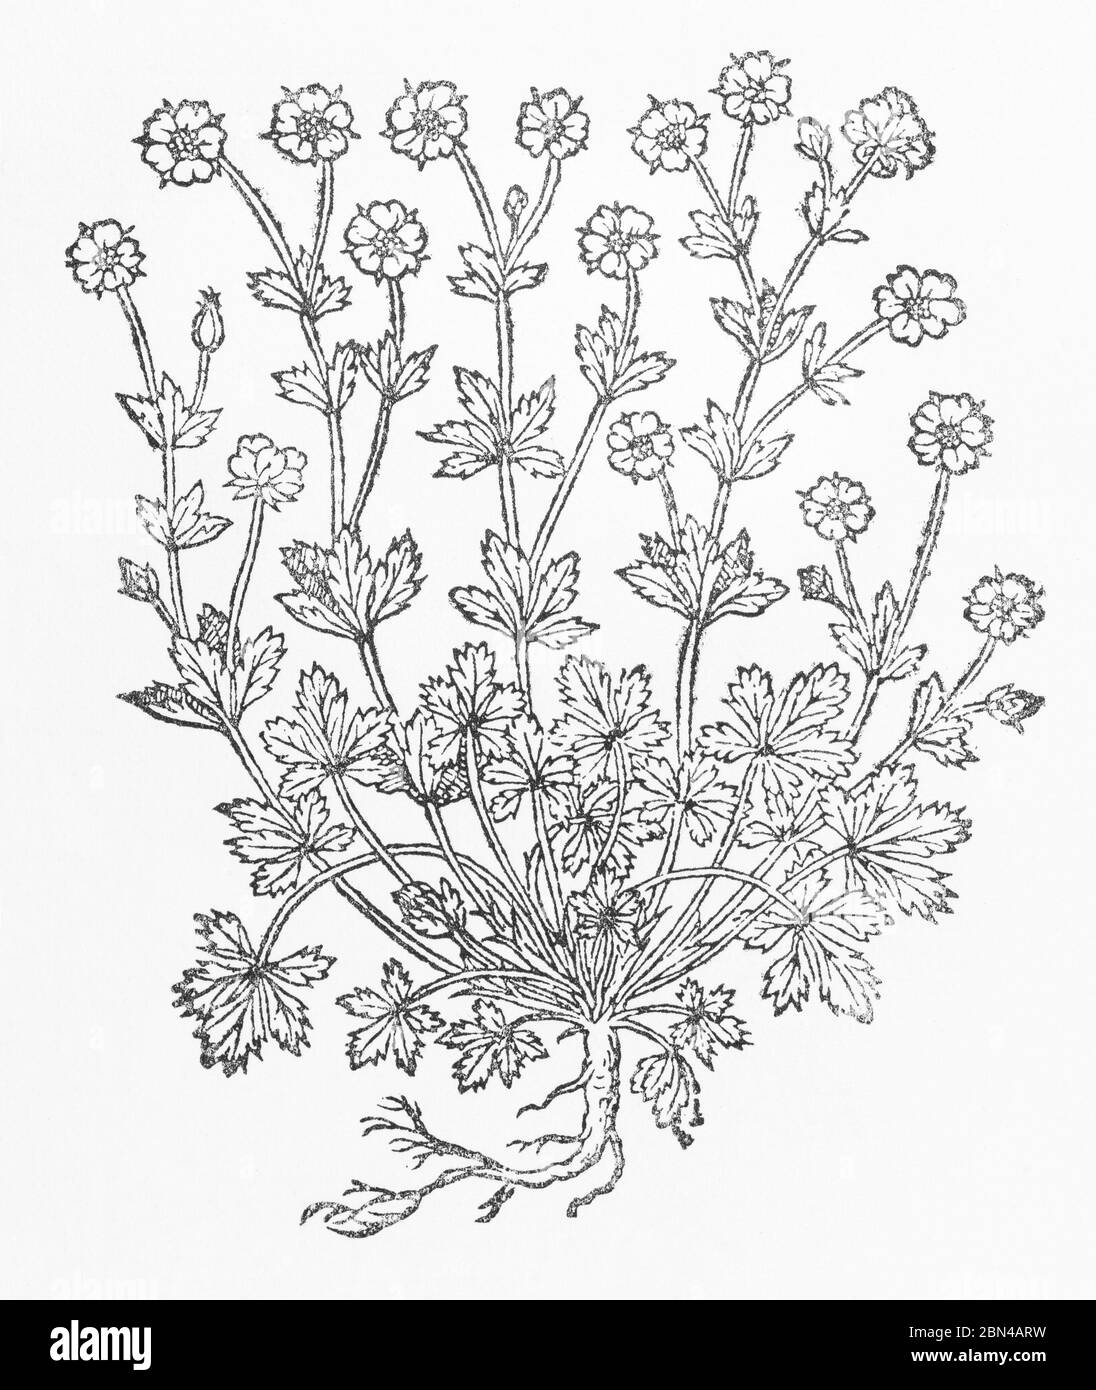 Spring Cinquefoil / Potentilla verna woodcut from Gerarde's Herball, History of Plants. He refers to it as Hoary Cinkfoil / Incana pentaphylla. P838 Stock Photo